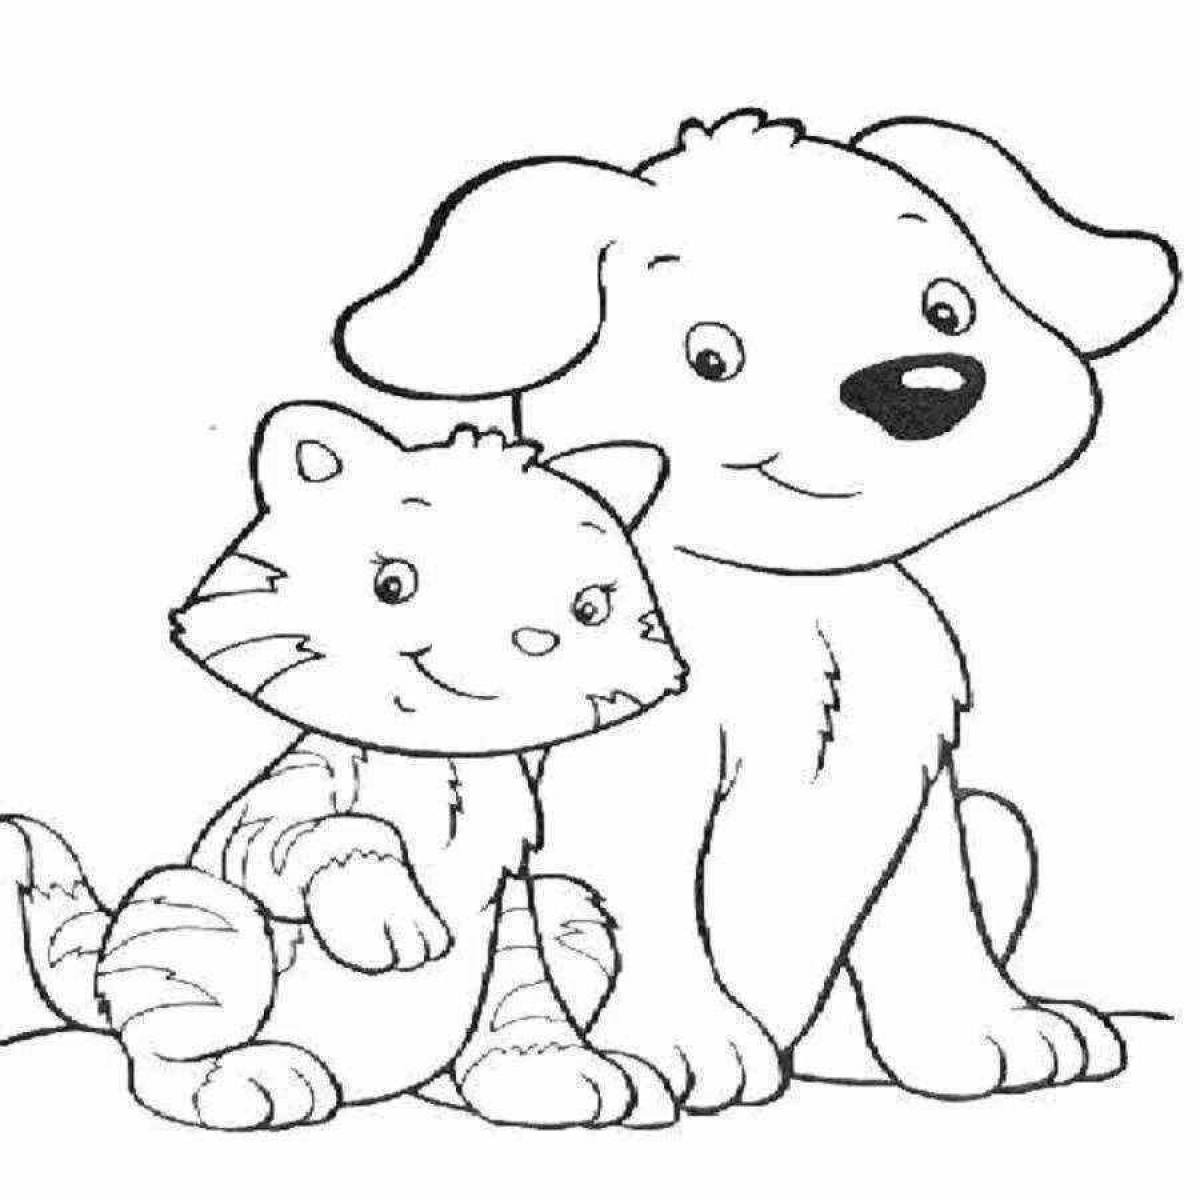 Wonderful animal coloring pages for girls